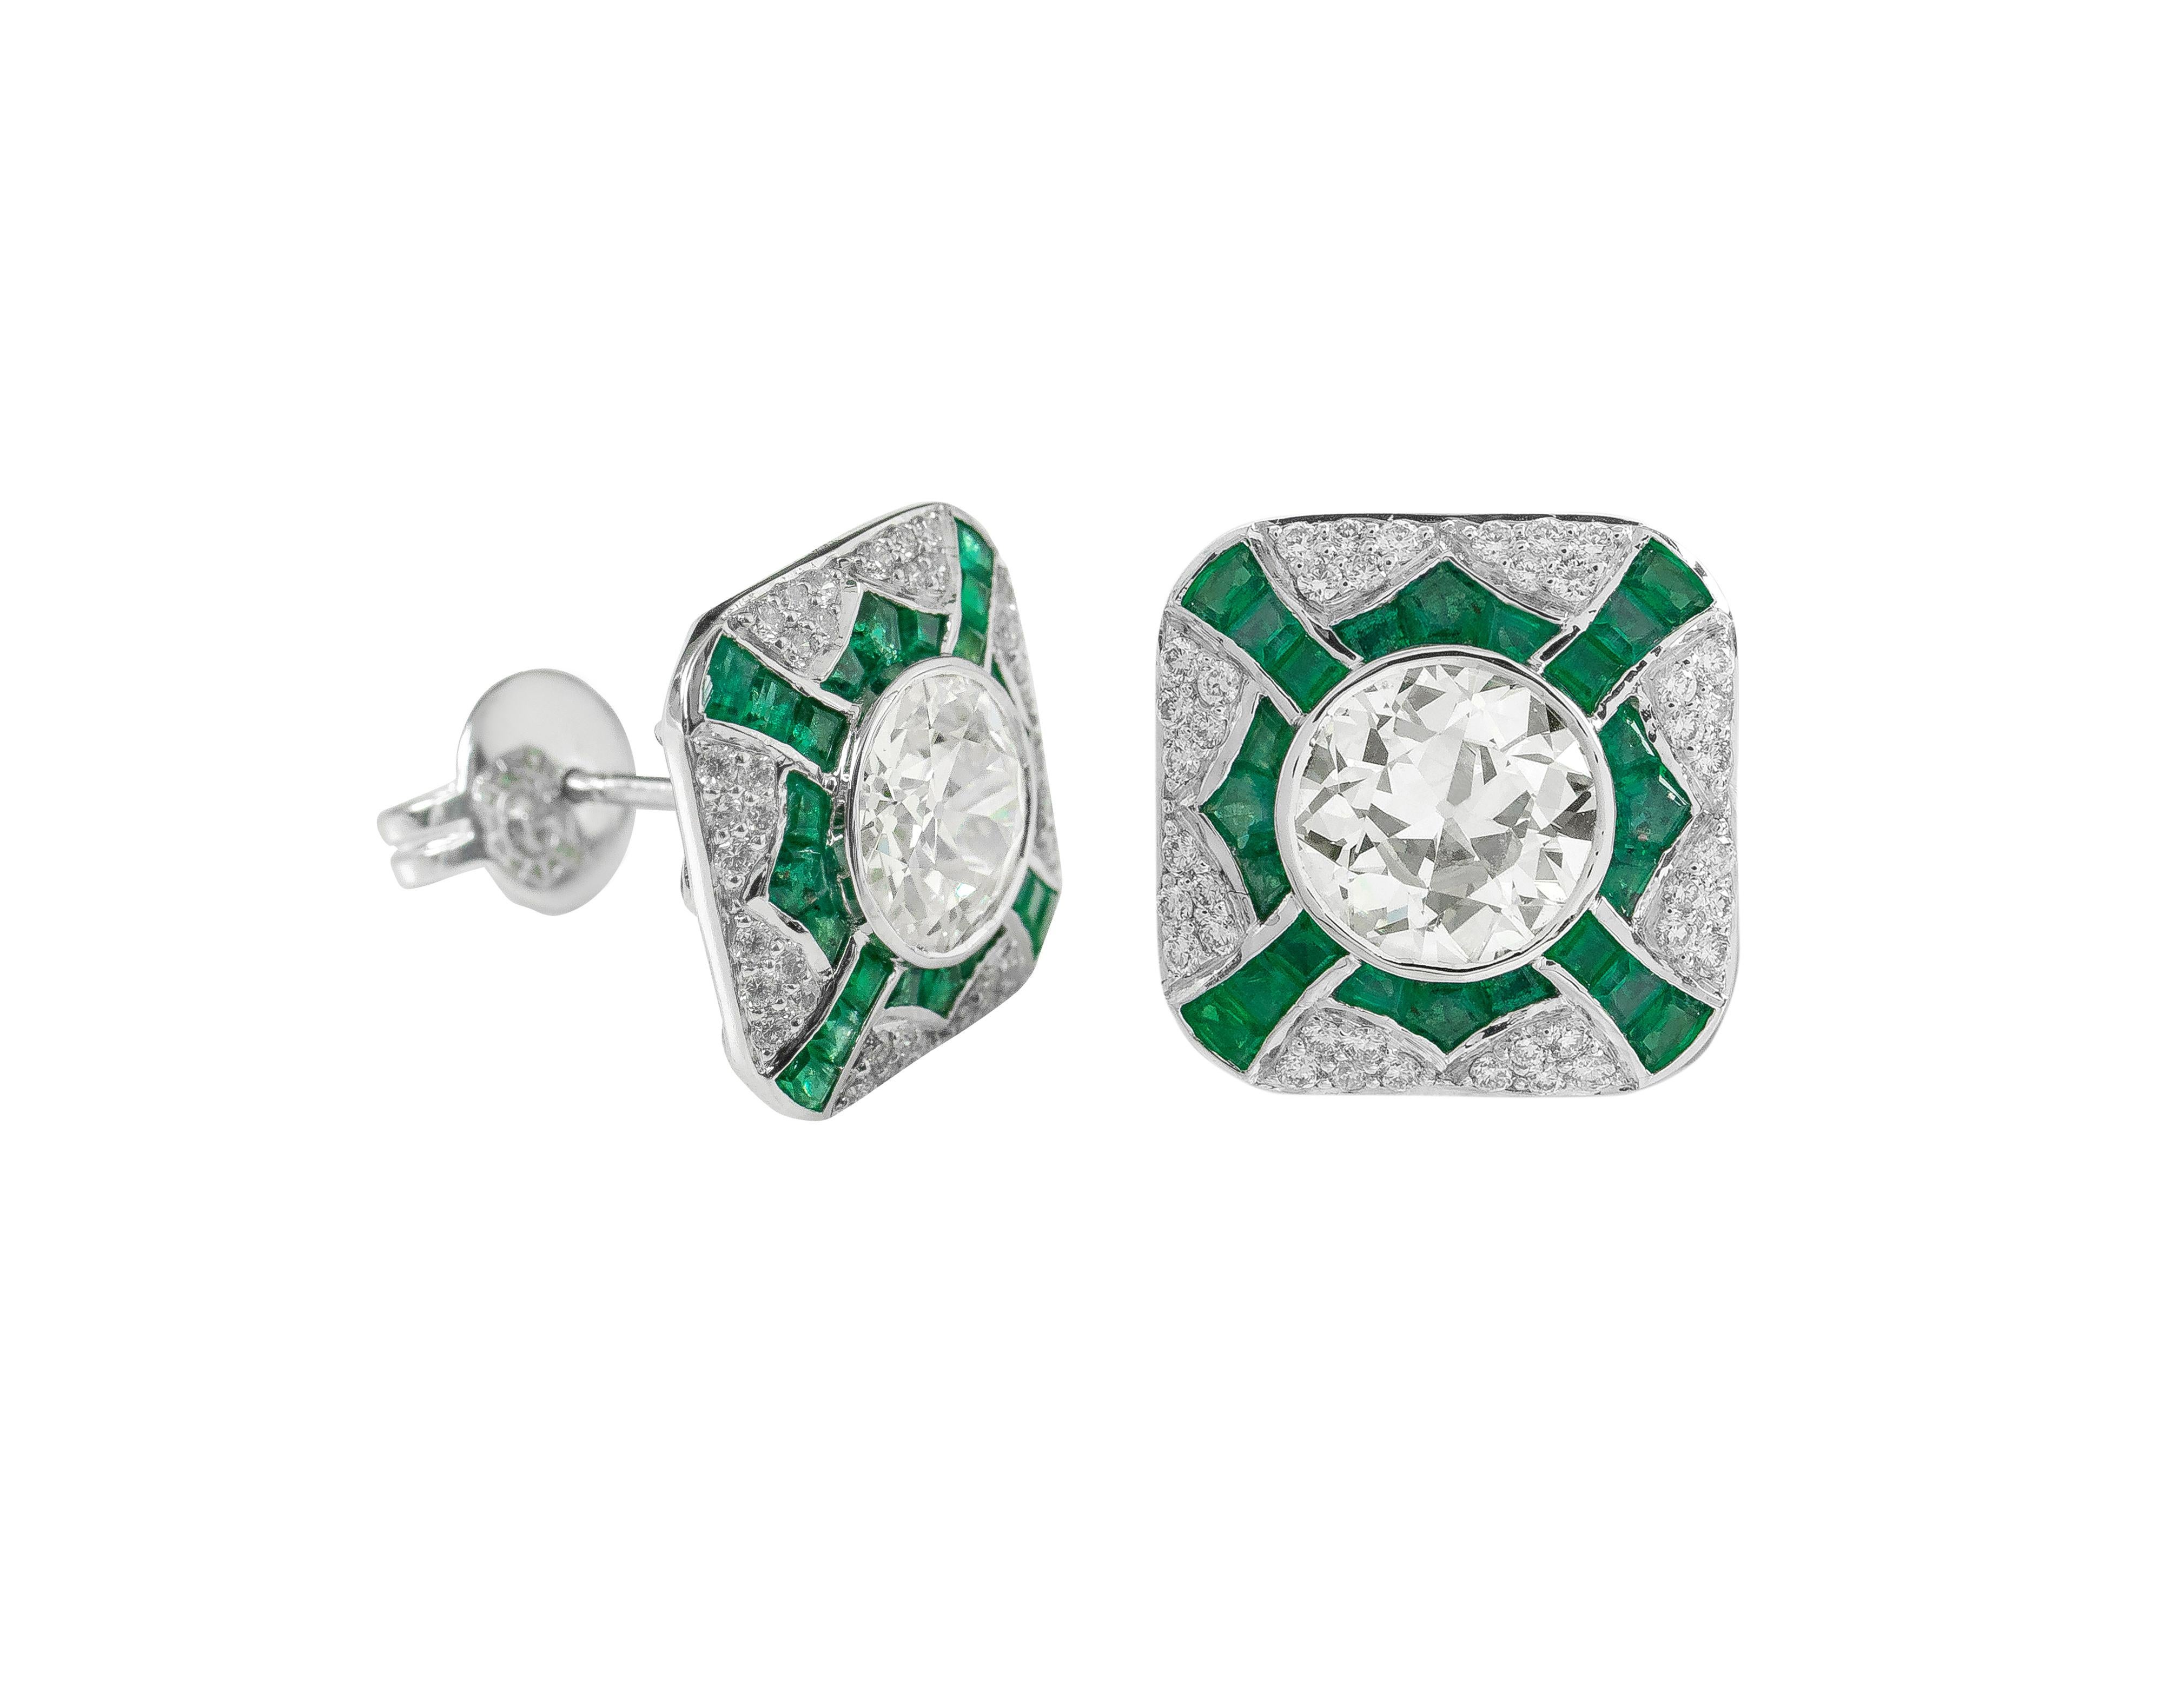 3.67 Carat Old European Cut Diamond with Emerald Stud Earrings in Art-Deco Style

This old mutual/European cut diamond solitaire pair is a phenomenal princely design. The diamond pair of 3.67 carats is an antique 58 facets cut without the precision